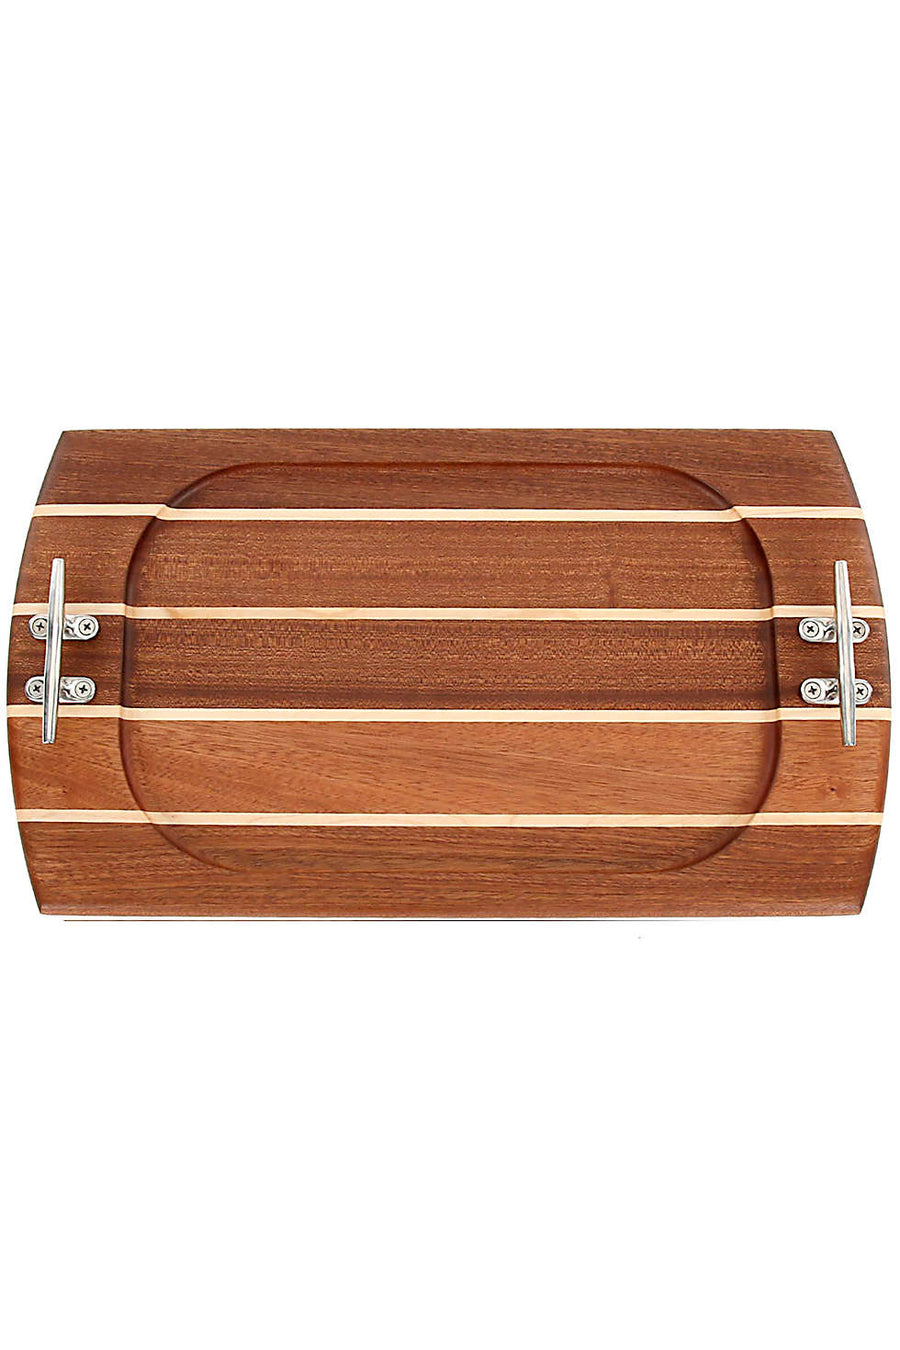 Nautical Rectangle Sapele serving board with accents of Maple. Made in USA. Stainless steel cleat handles. 